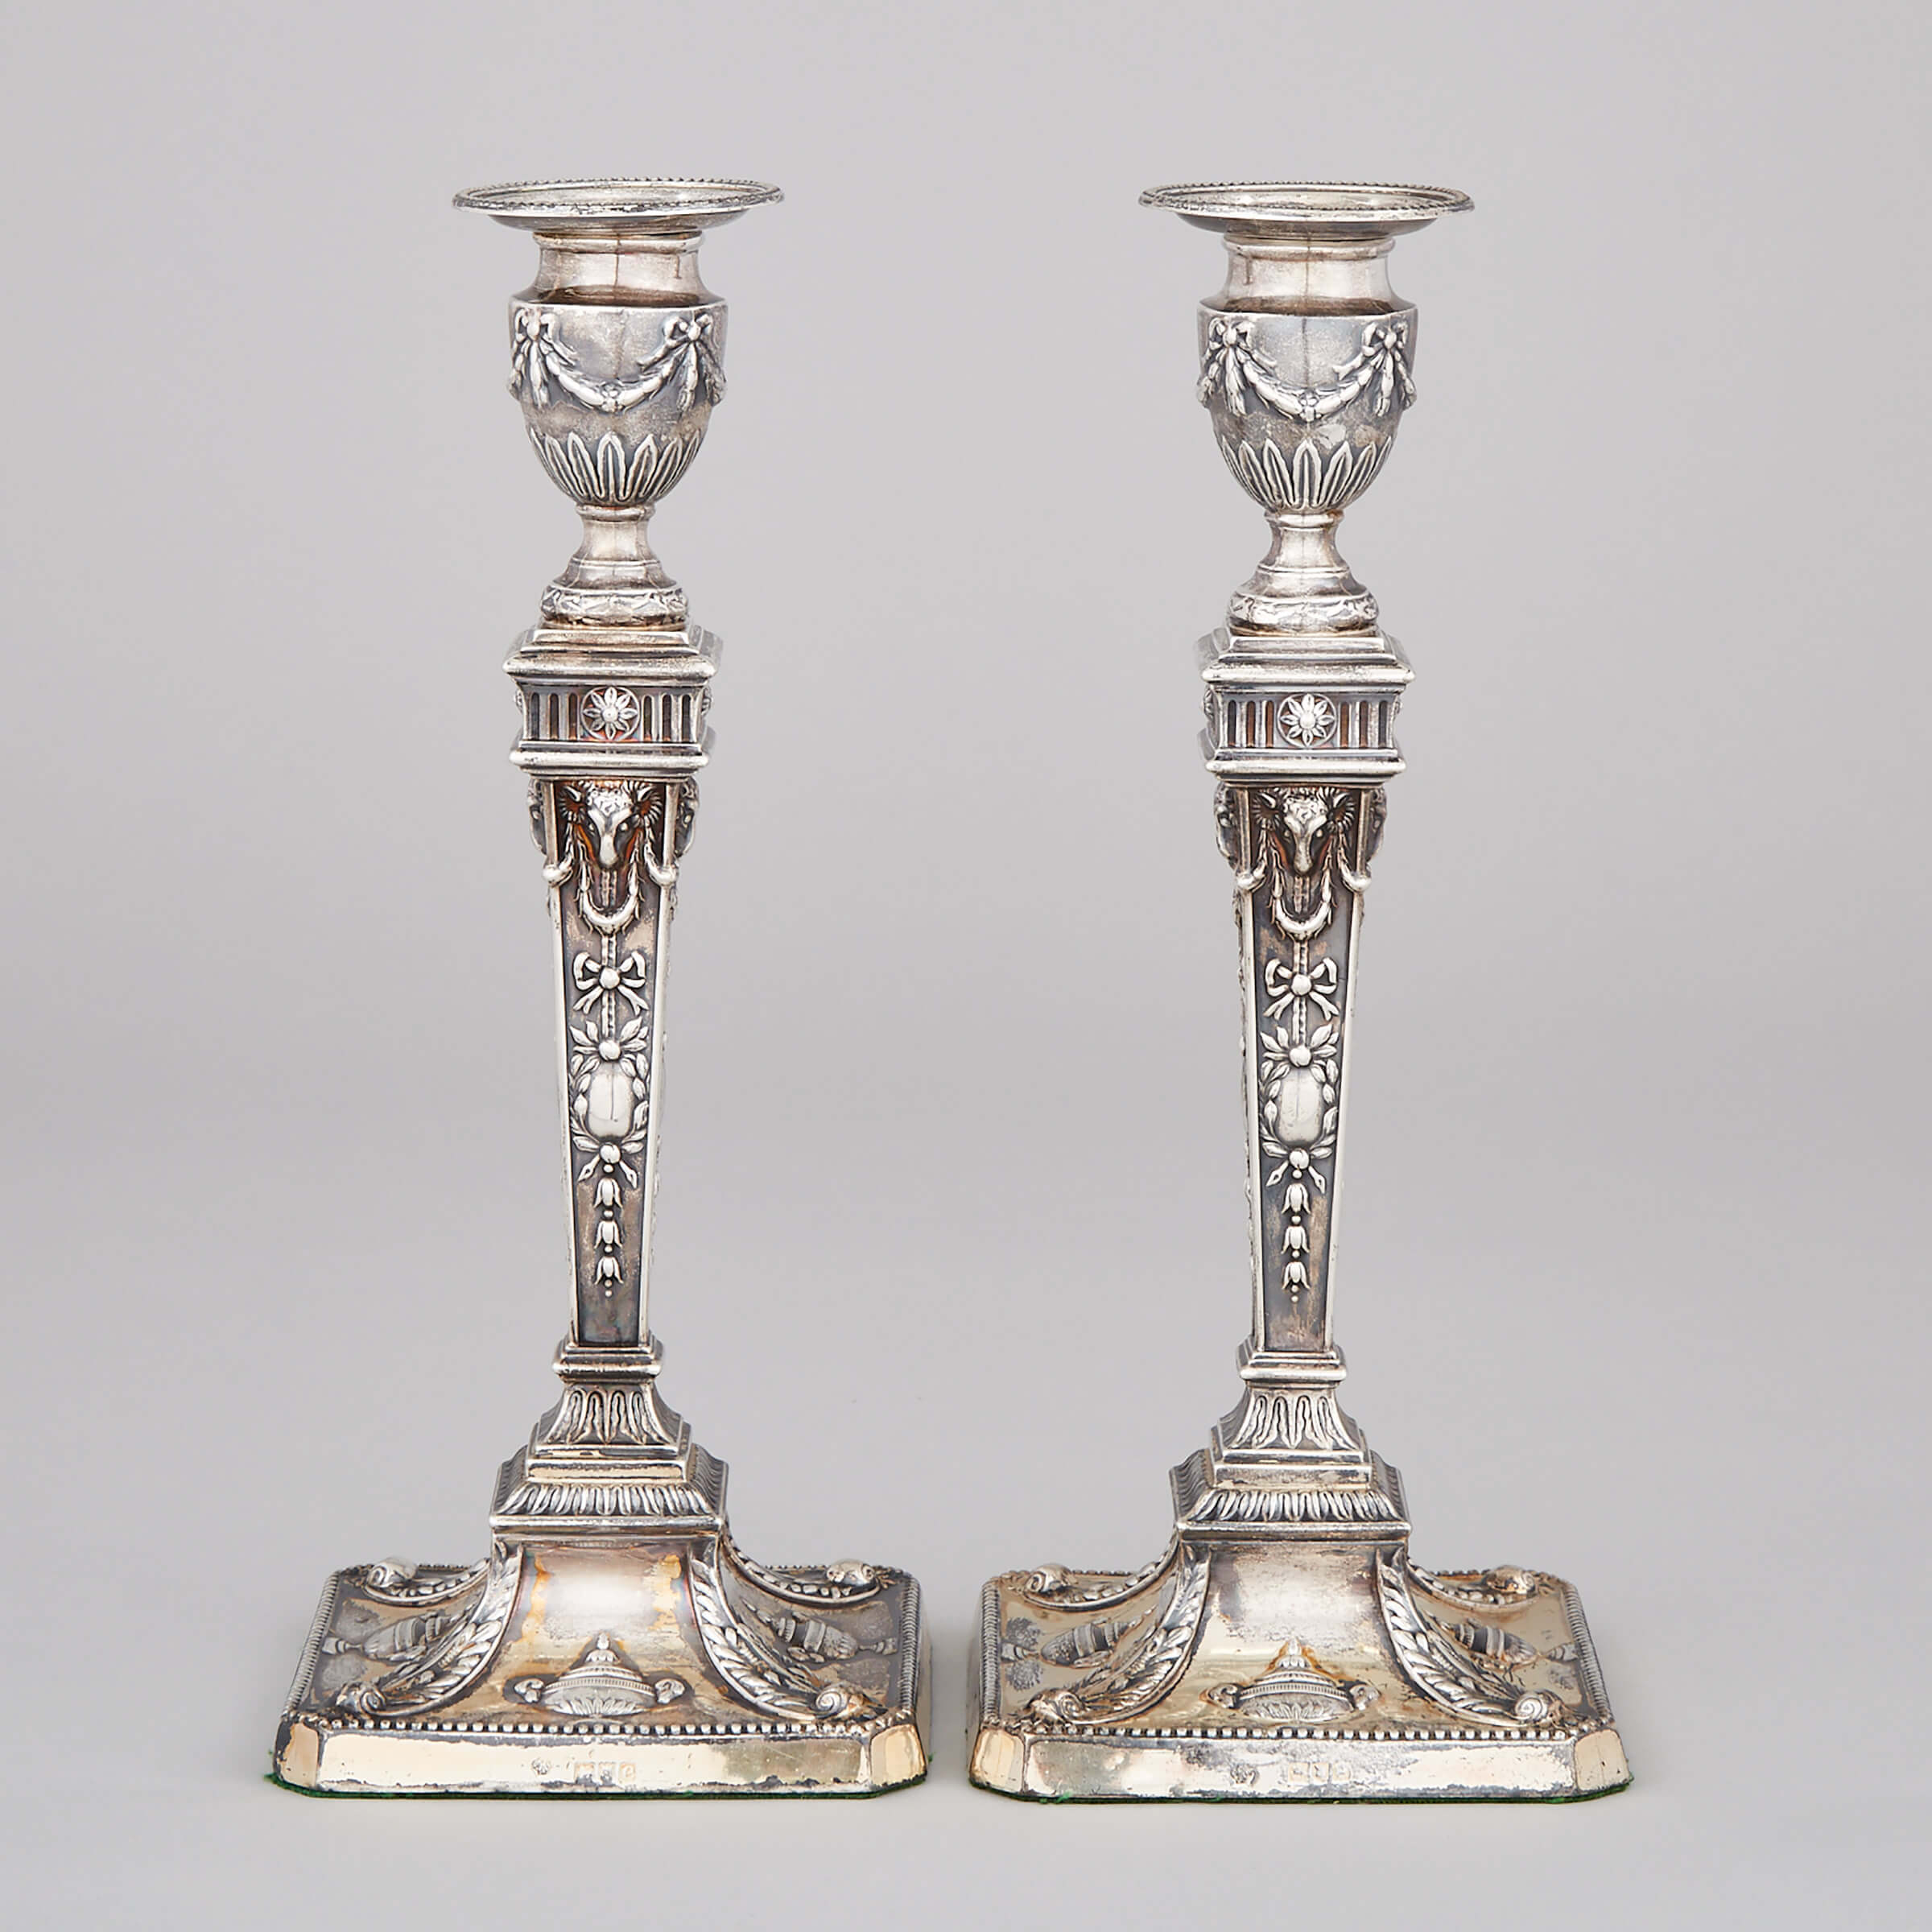 Pair of Late Victorian Silver Table Candlesticks, William Hutton & Sons, London, 1900